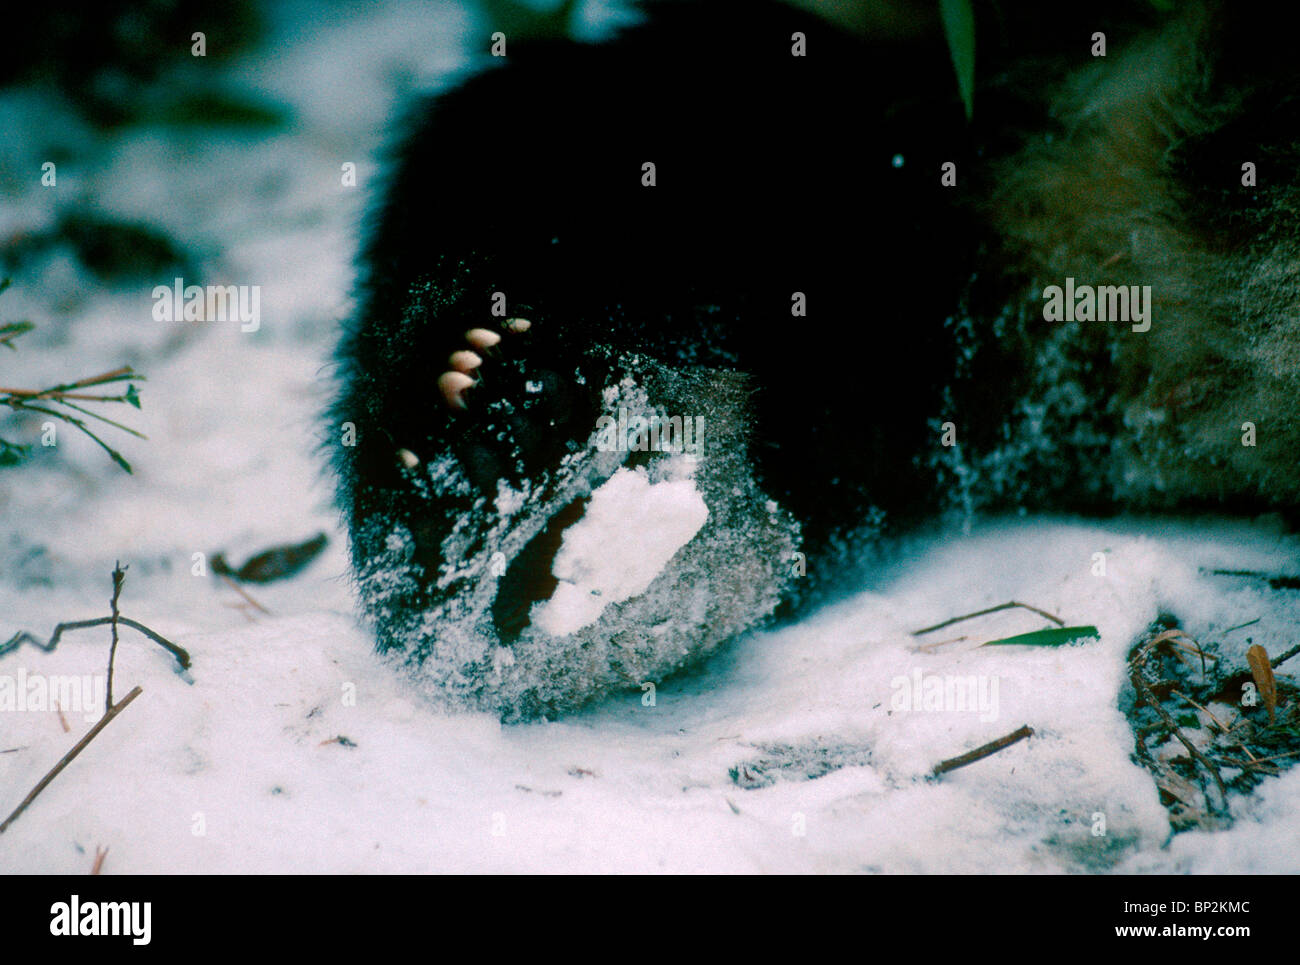 Underside of giant panda hind paw covered in snow in winter, Wolong, China Stock Photo